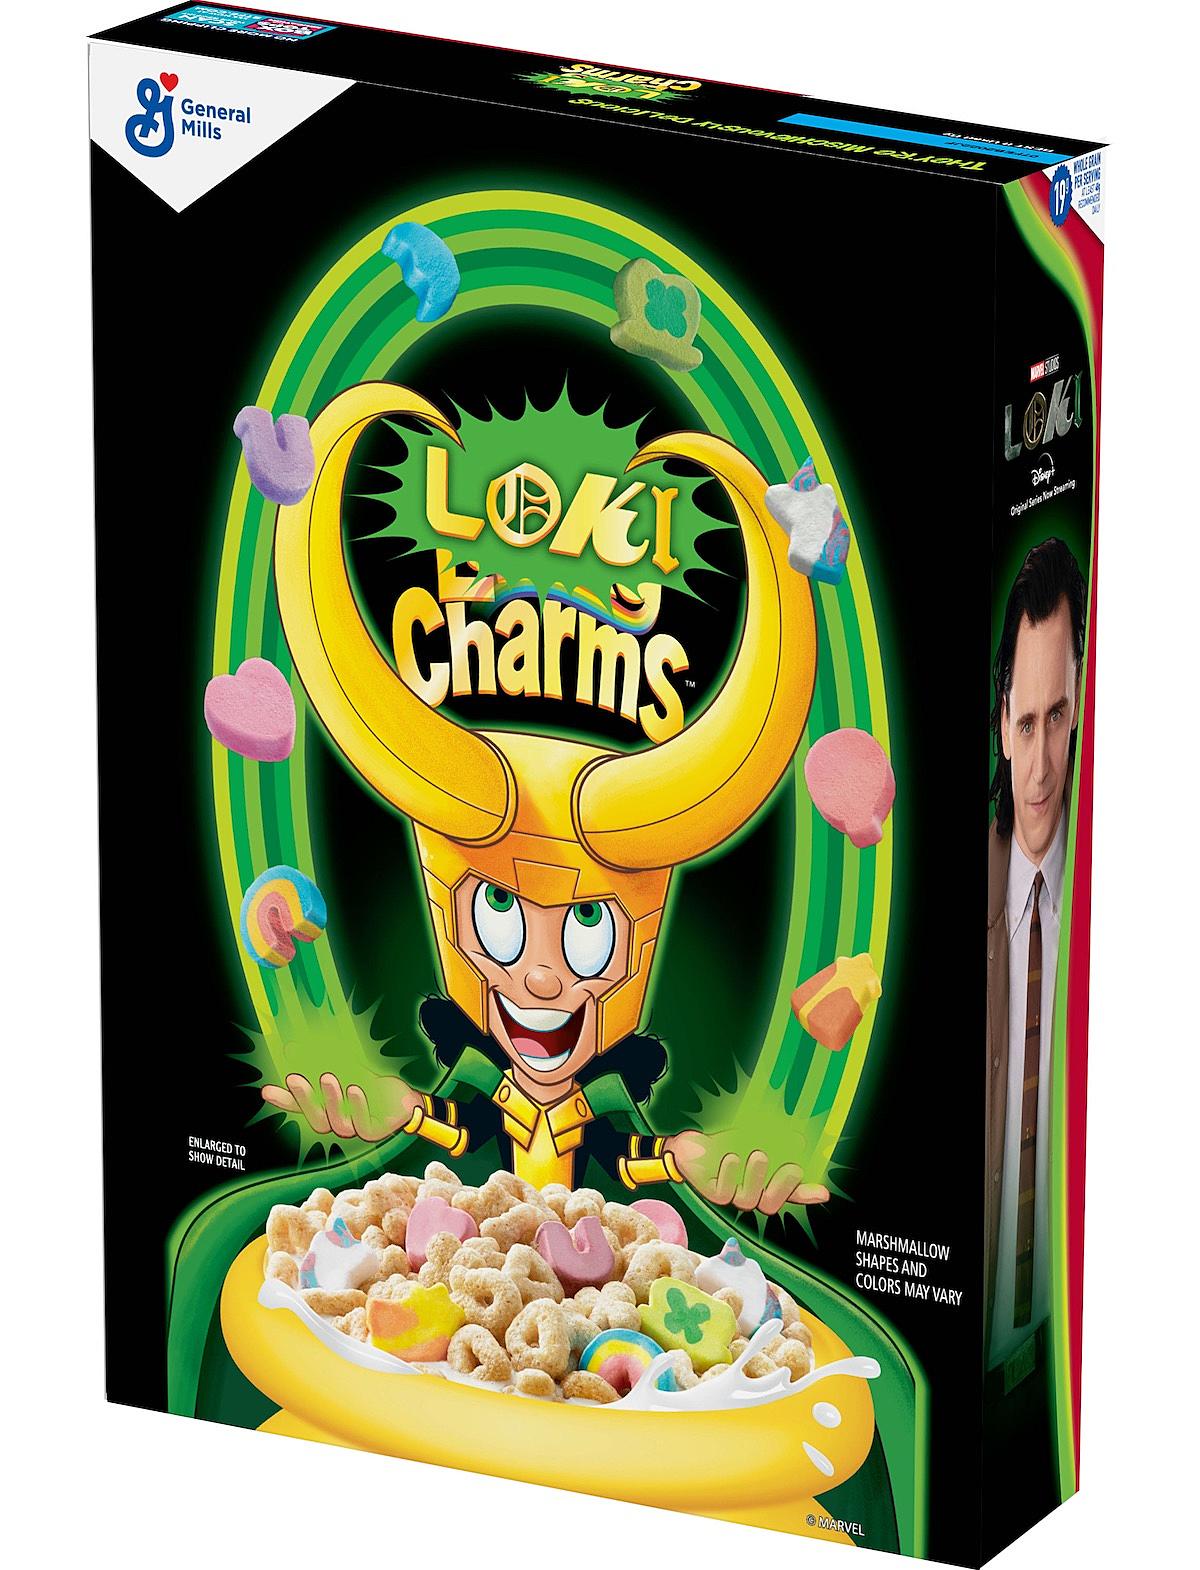 Loki Is the New Mascot of Lucky Charms